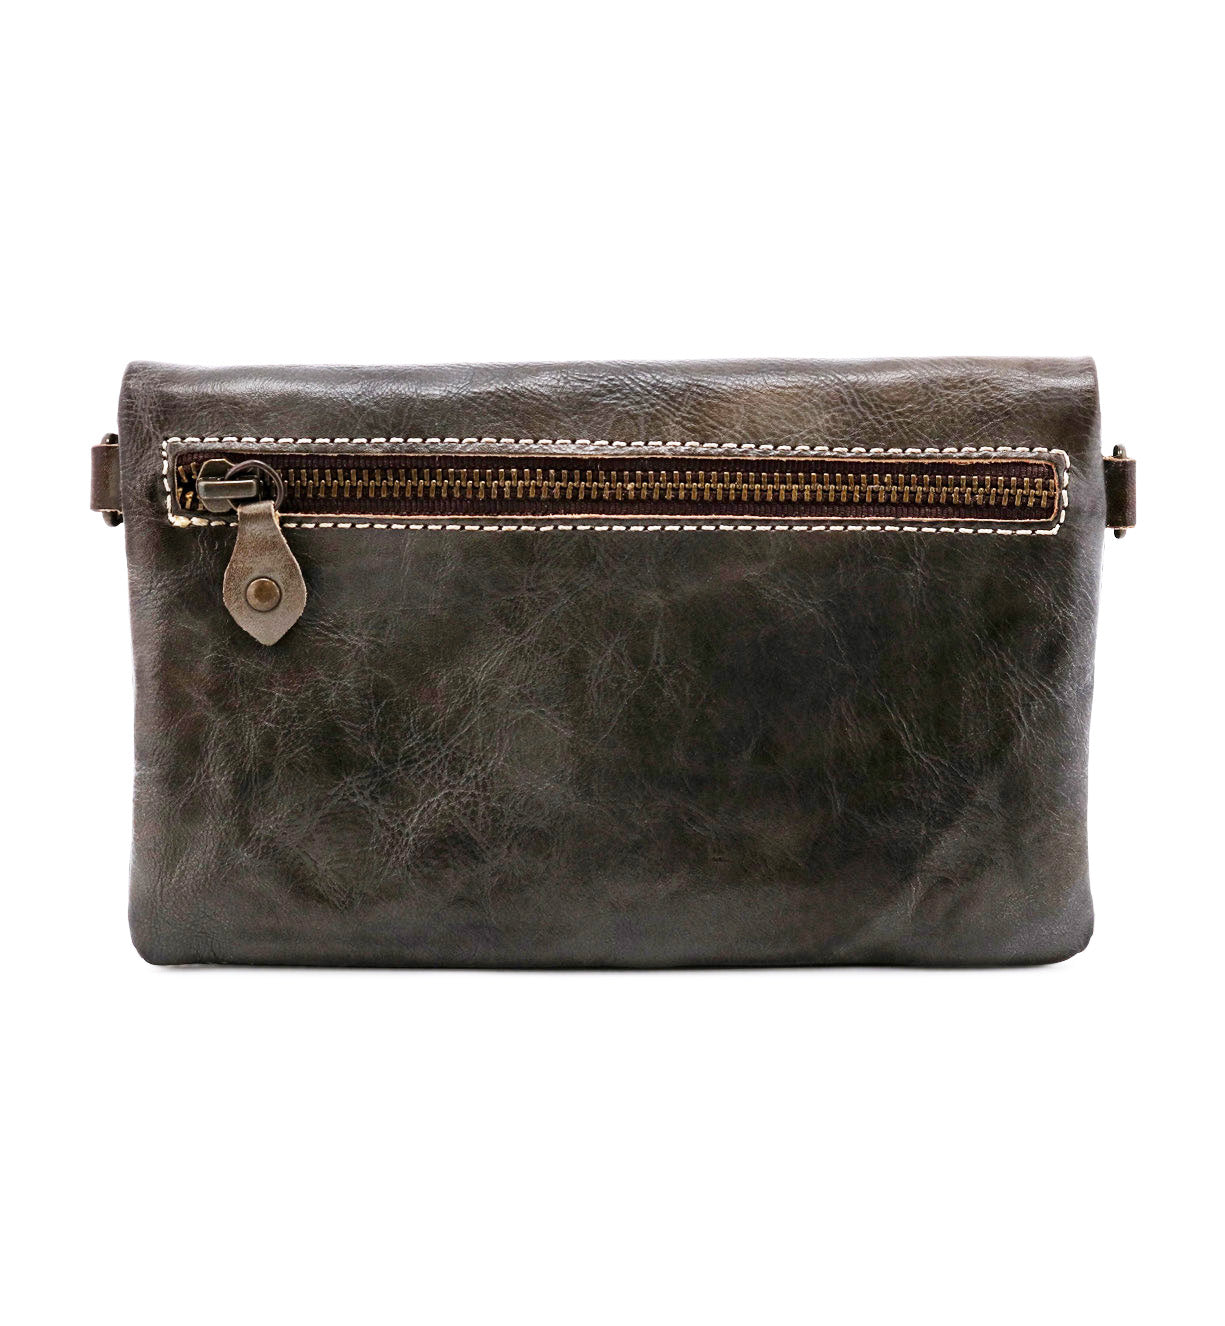 A taupe leather Cadence clutch bag with a zipper, by Bed Stu.